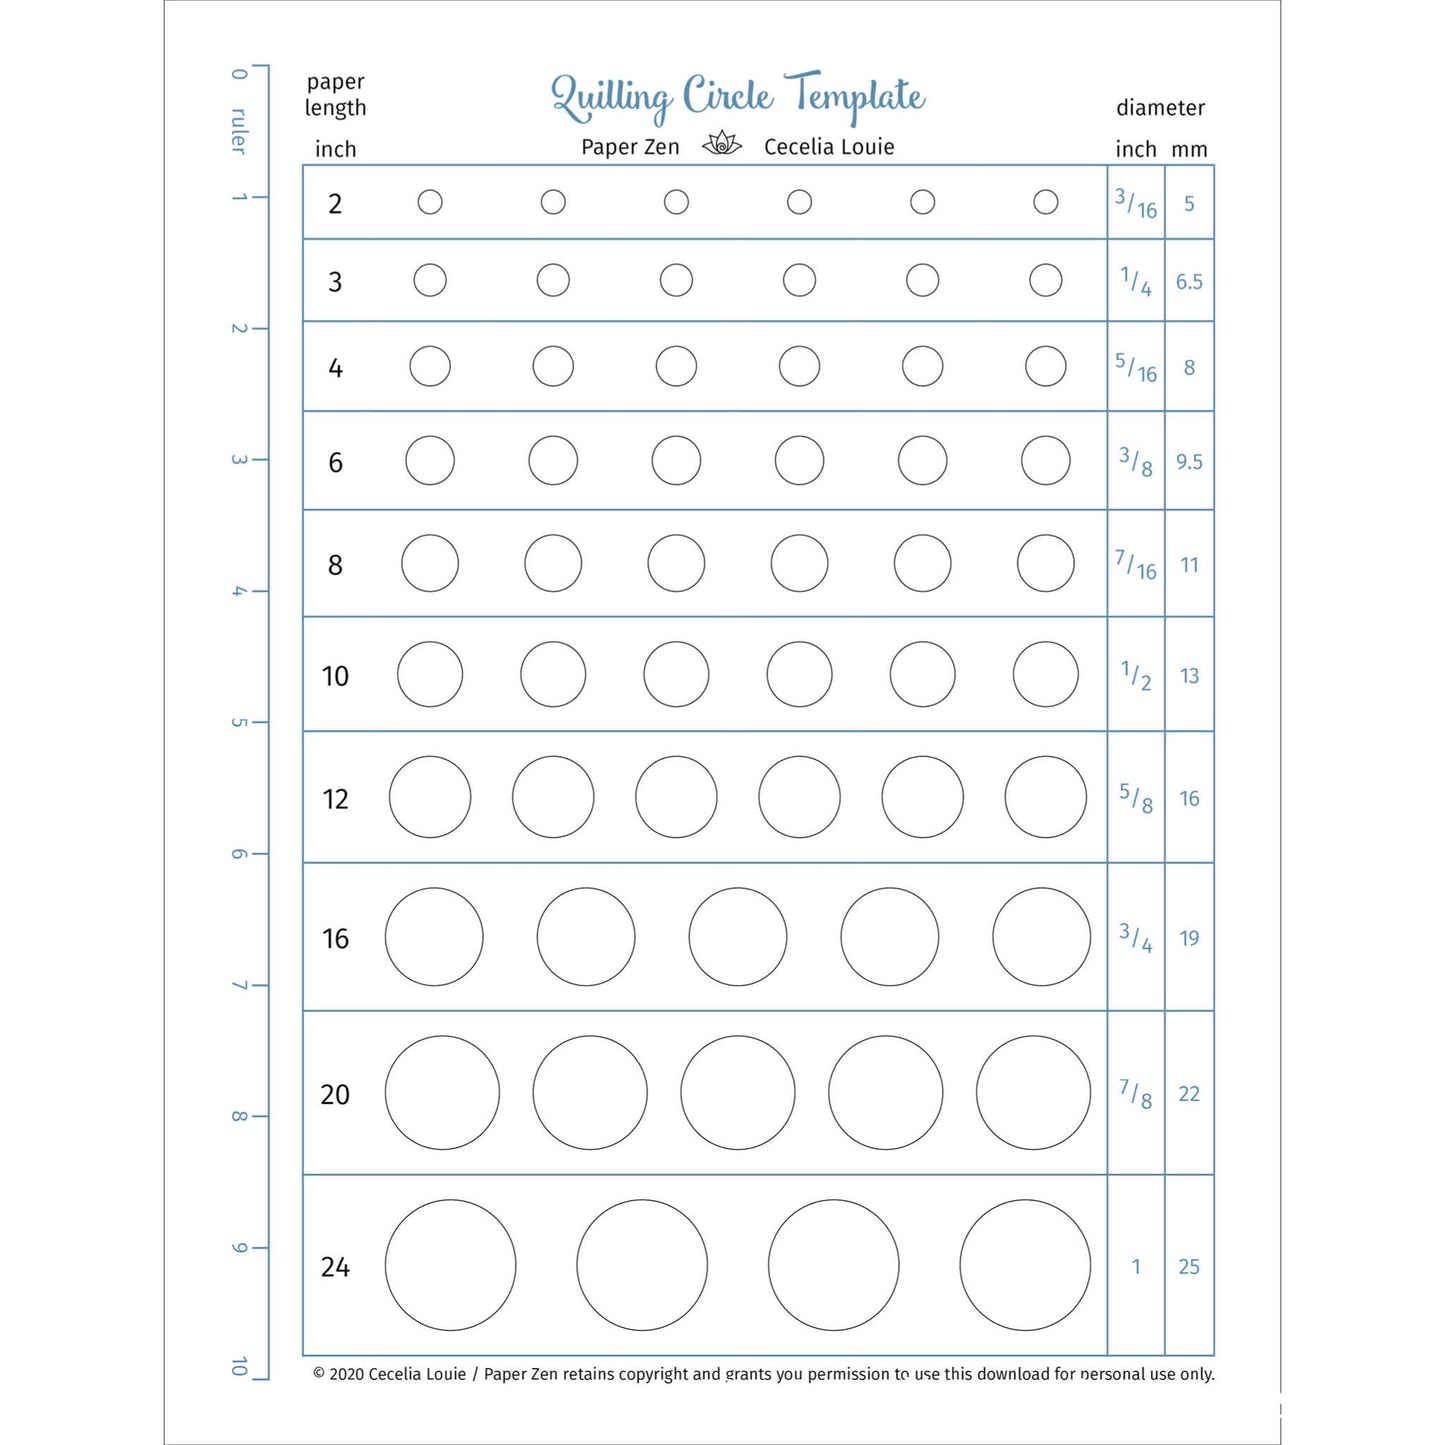 Quilling Circle Template - PDF